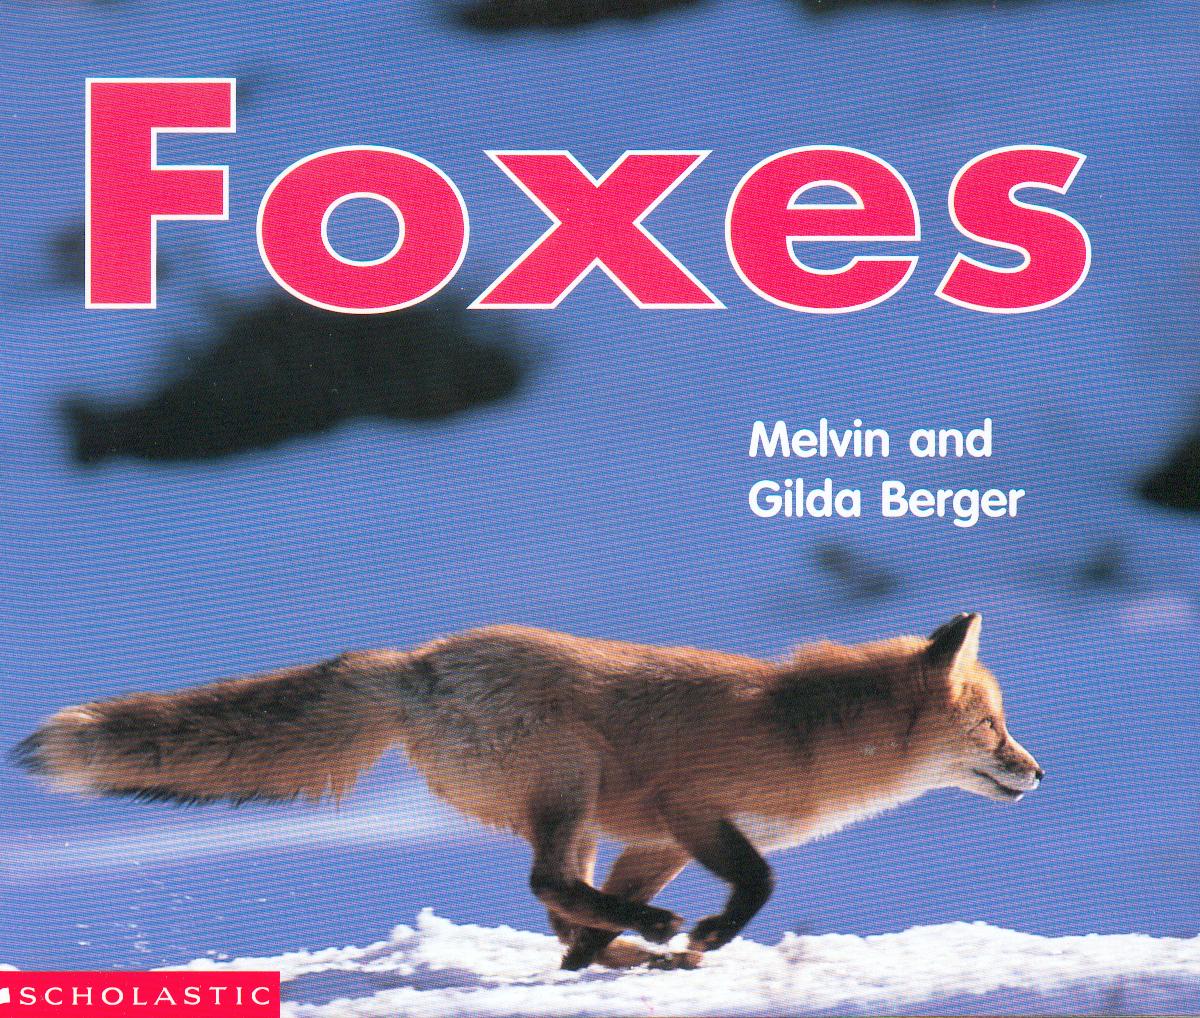 Foxes / Melvin and Gilda Berger.